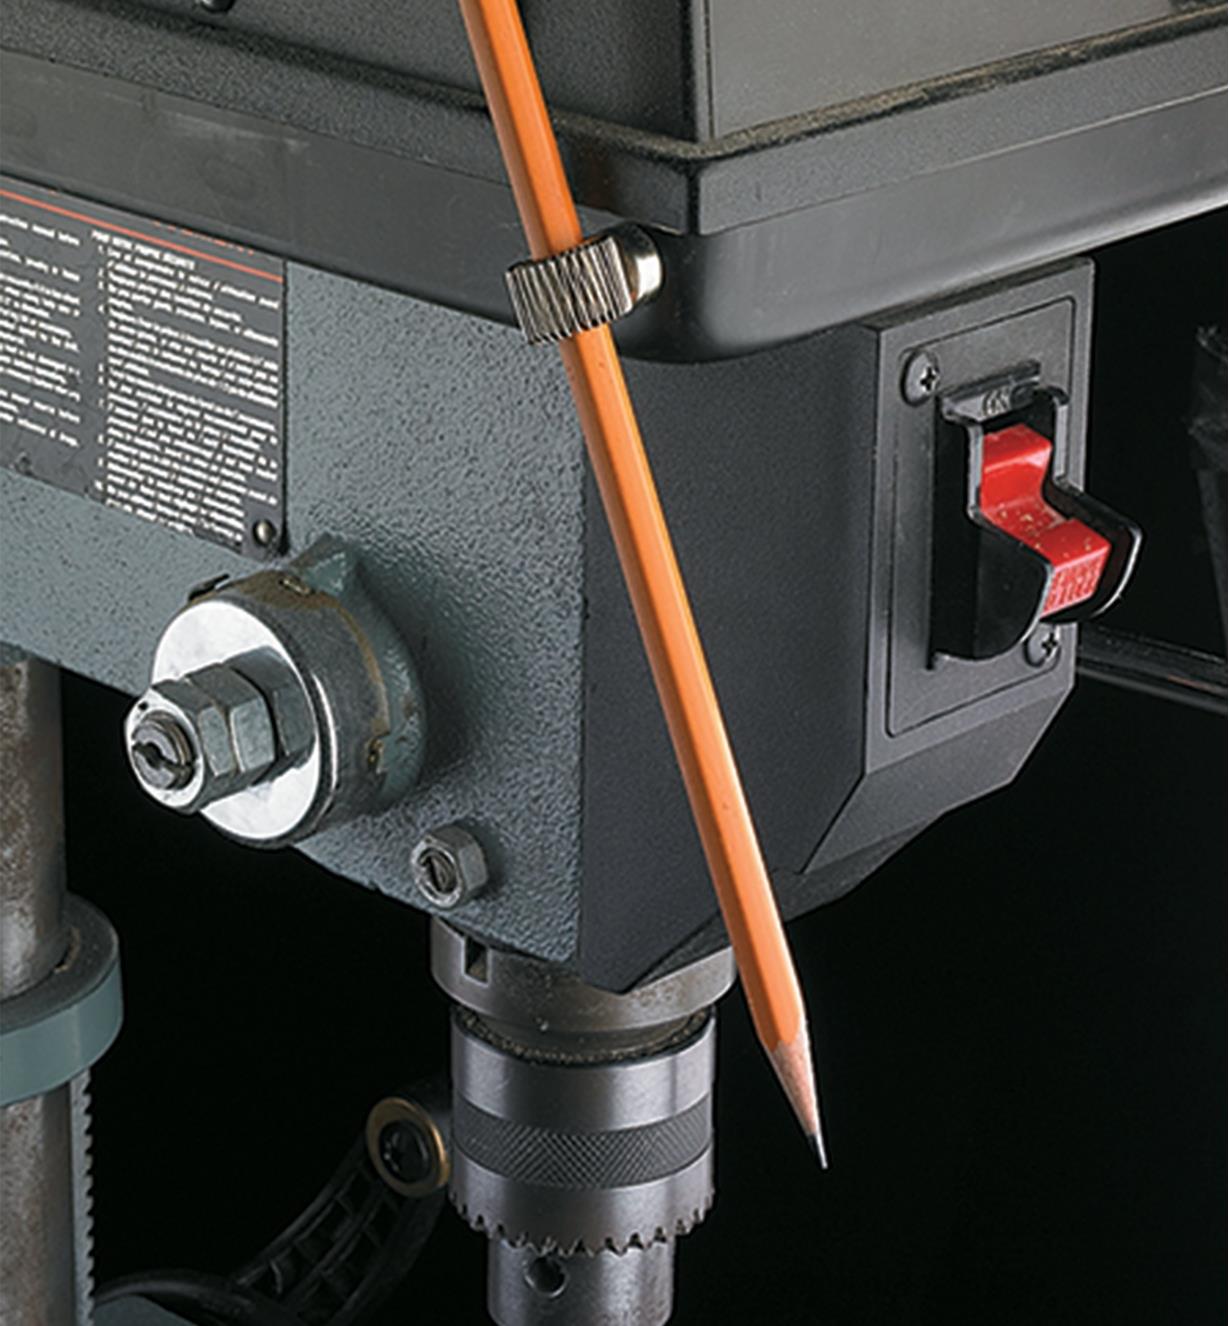 Magnet-Based Pen & Pencil Holders holding a pencil on a drill press